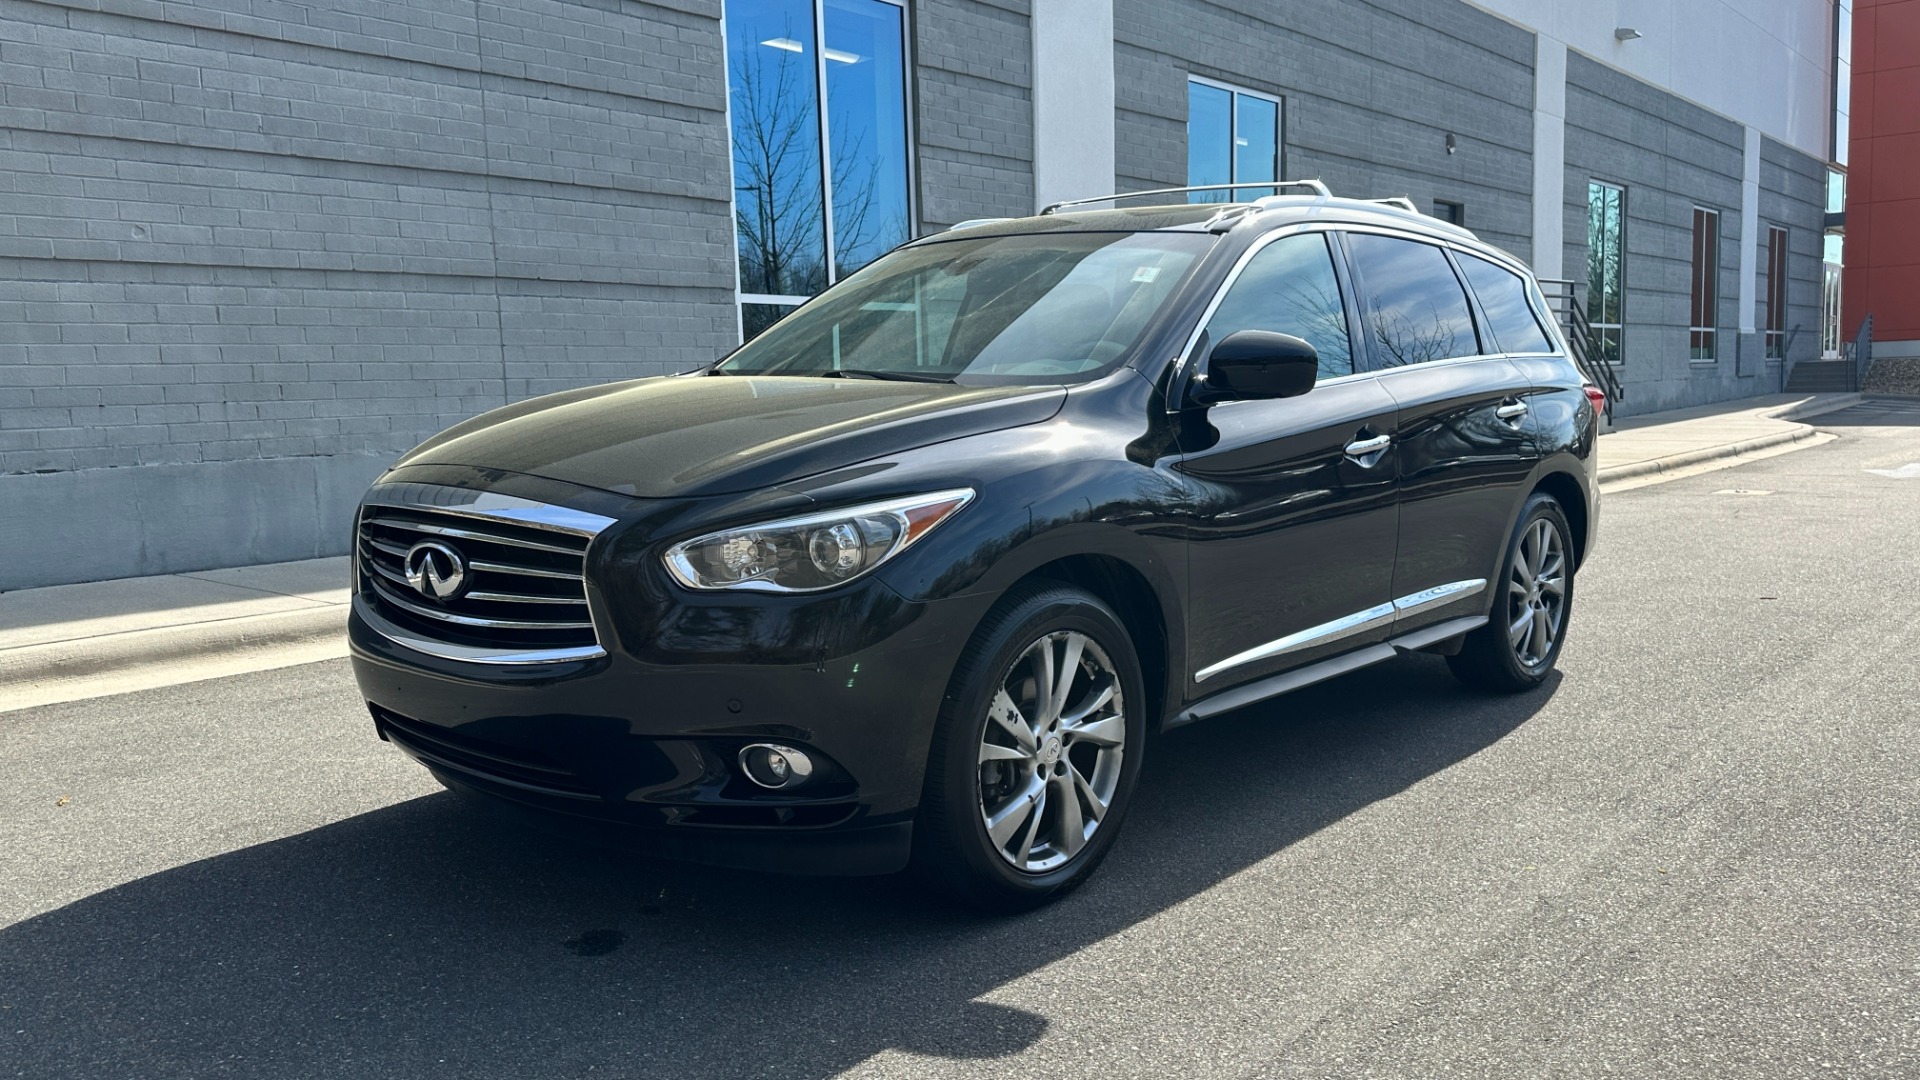 Used 2013 INFINITI JX35 AWD / DVD THEATER PKG / PREMIUM / DELUXE TECH / CARGO / TECH PKG for sale Sold at Formula Imports in Charlotte NC 28227 2